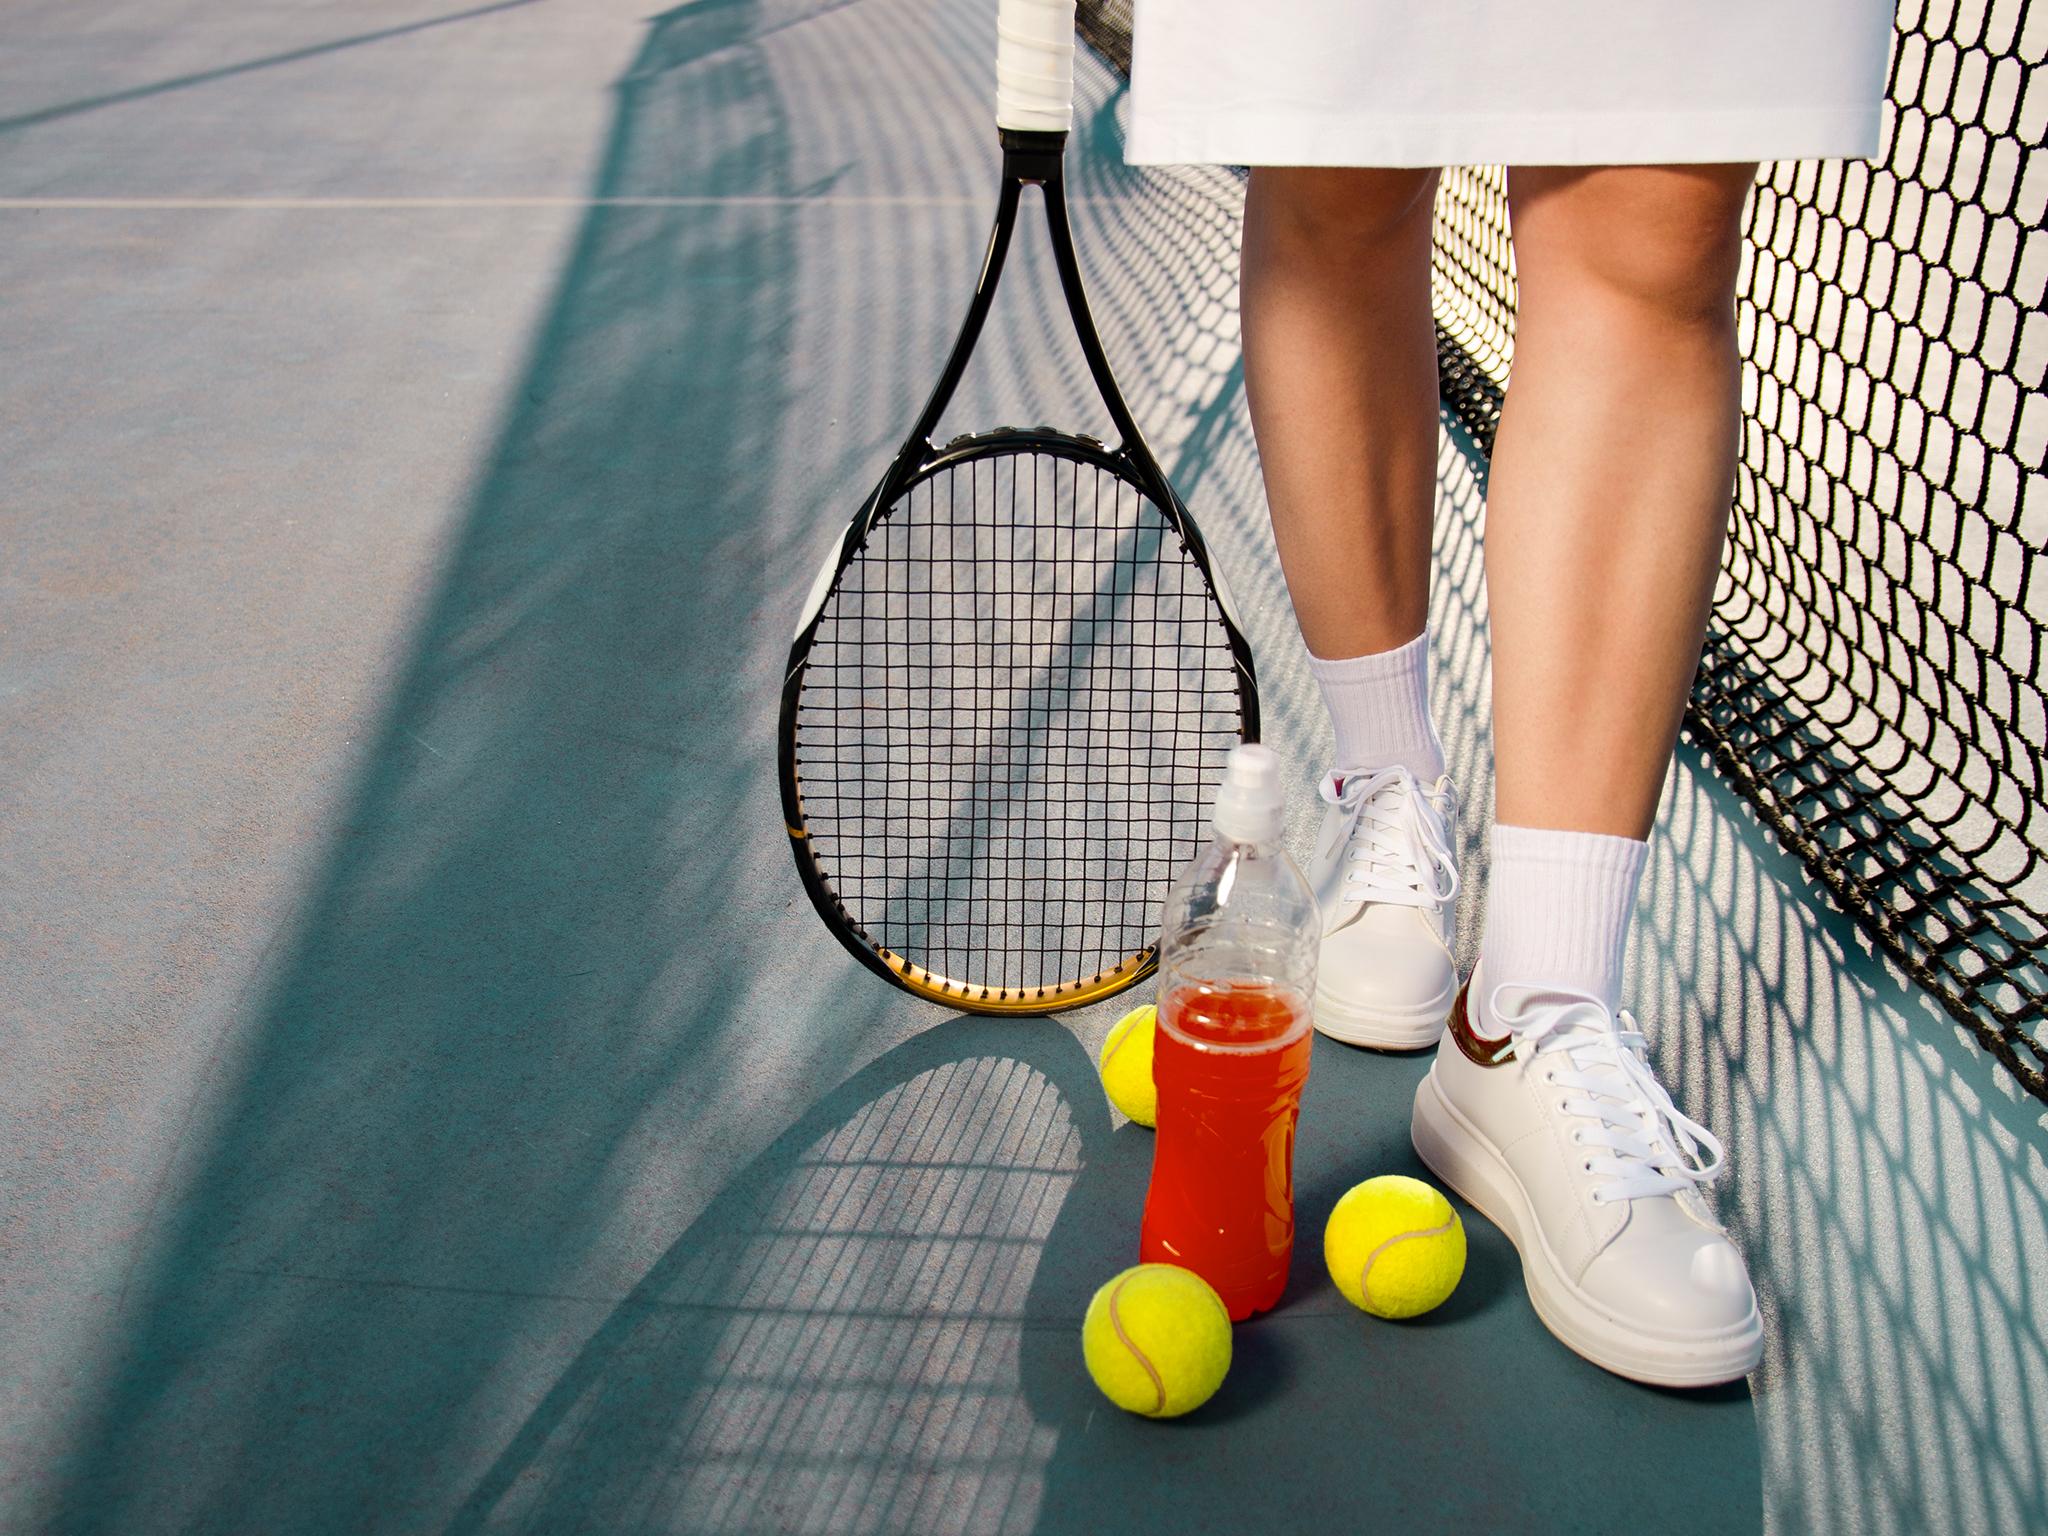 Game, set, match with these must-haves for playing tennis at home